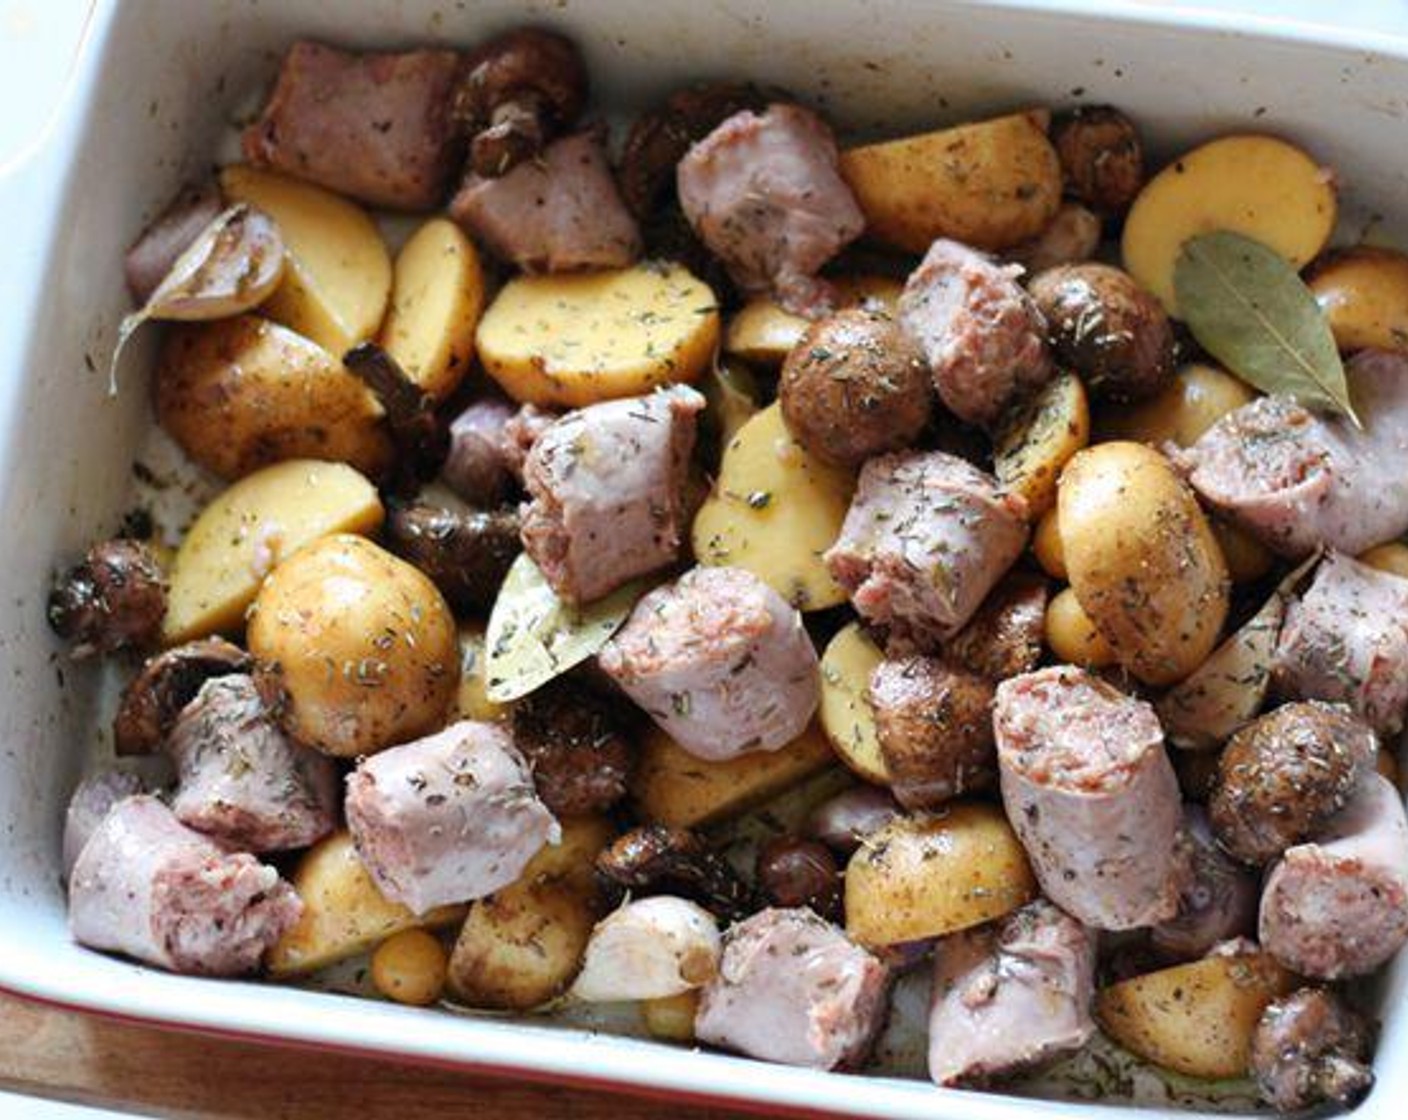 step 2 Mix Spicy Italian Sausage Link (1 lb), Yukon Gold Potatoes (6), Cremini Mushroom (1 cup), Tomatillo (1 cup), {@10:}, Shallots (2), Olive Oil (1/4 cup), Bay Leaves (2), Dried Thyme (1 Tbsp), Dried Rosemary (1 Tbsp), and Balsamic Vinegar (1 Tbsp) together in a baking pan coating everything evenly.